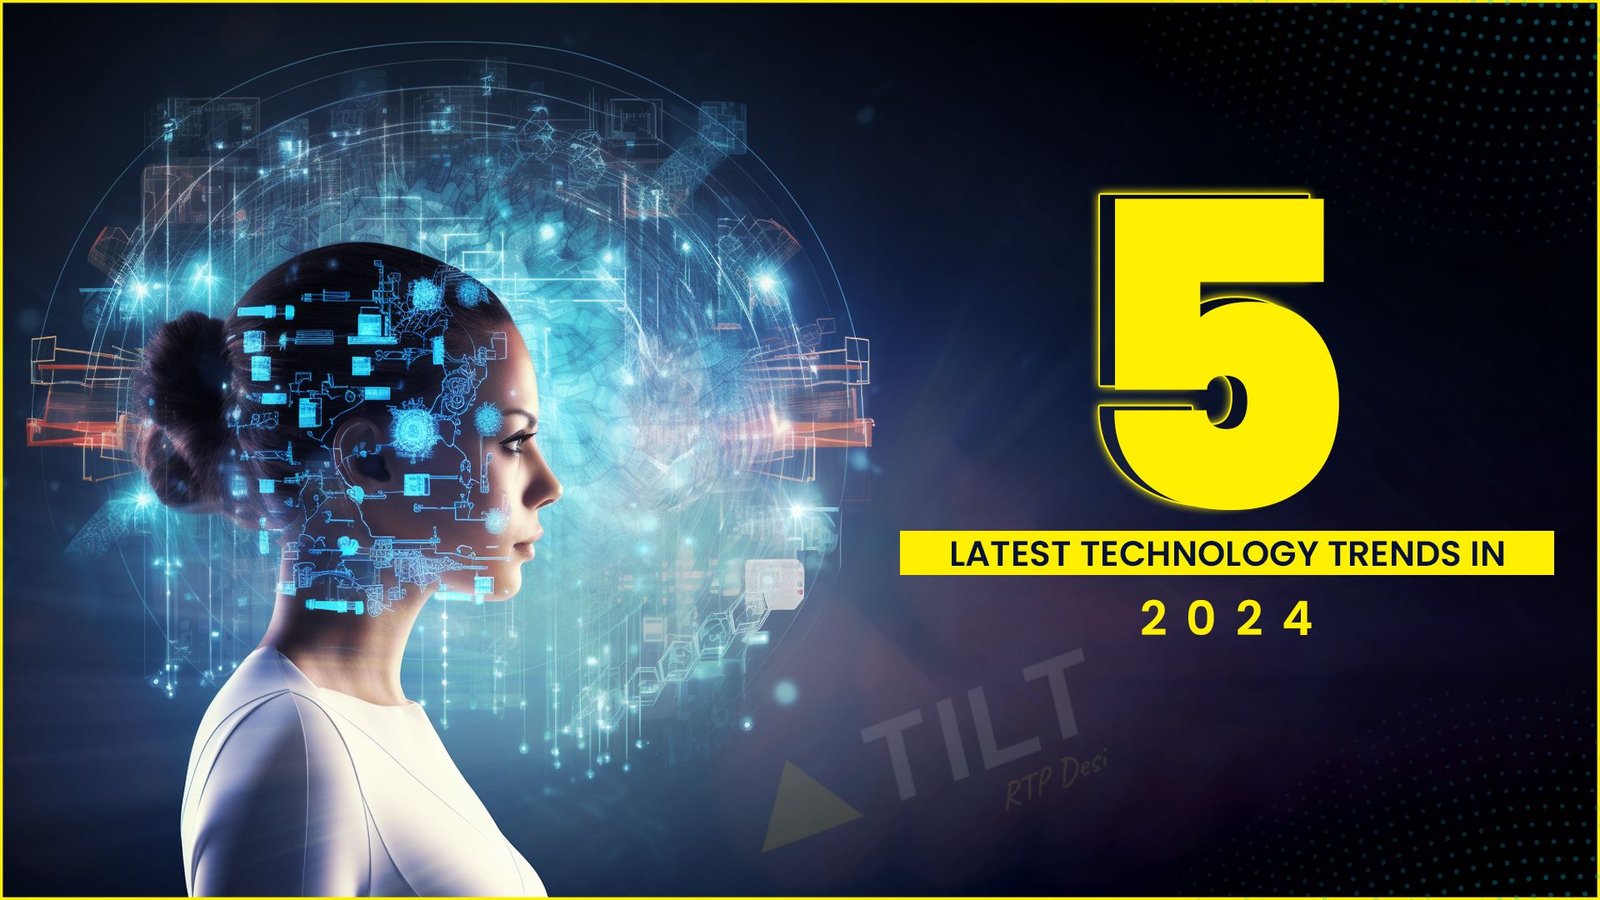 5 Latest Technology Trends in 2024 - Triangle Tilt